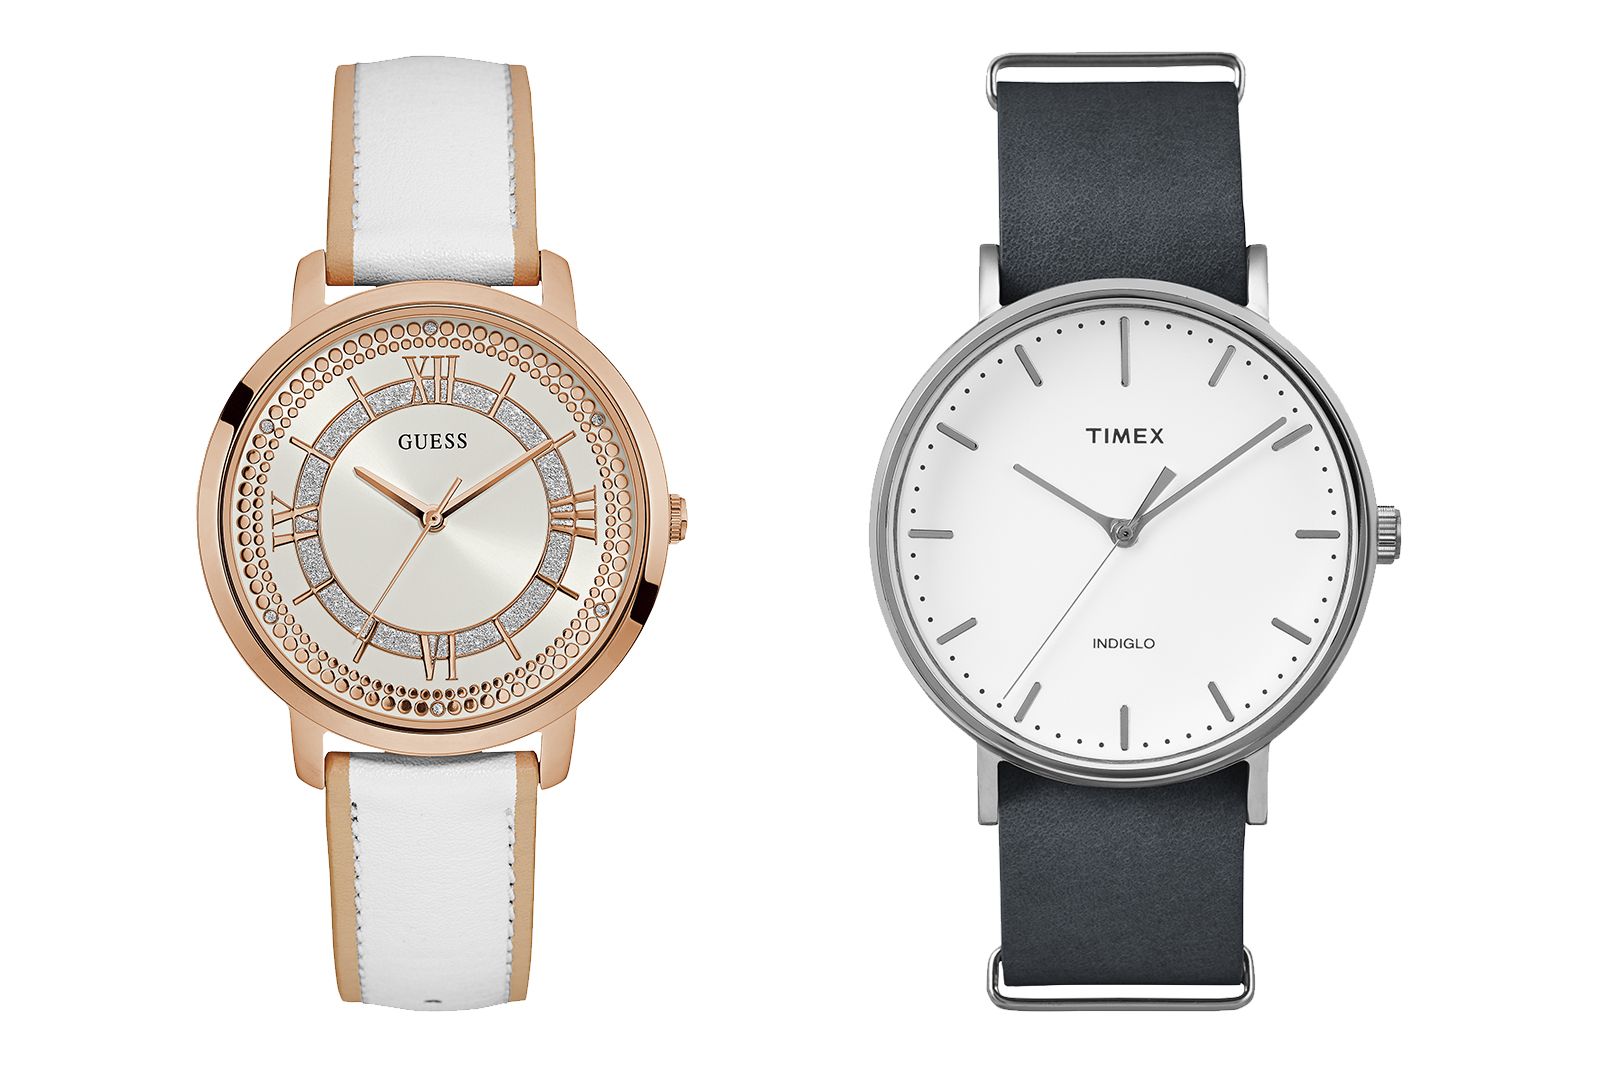 Barclays bPay now supported by 7 watch brands including Guess and Timex image 1